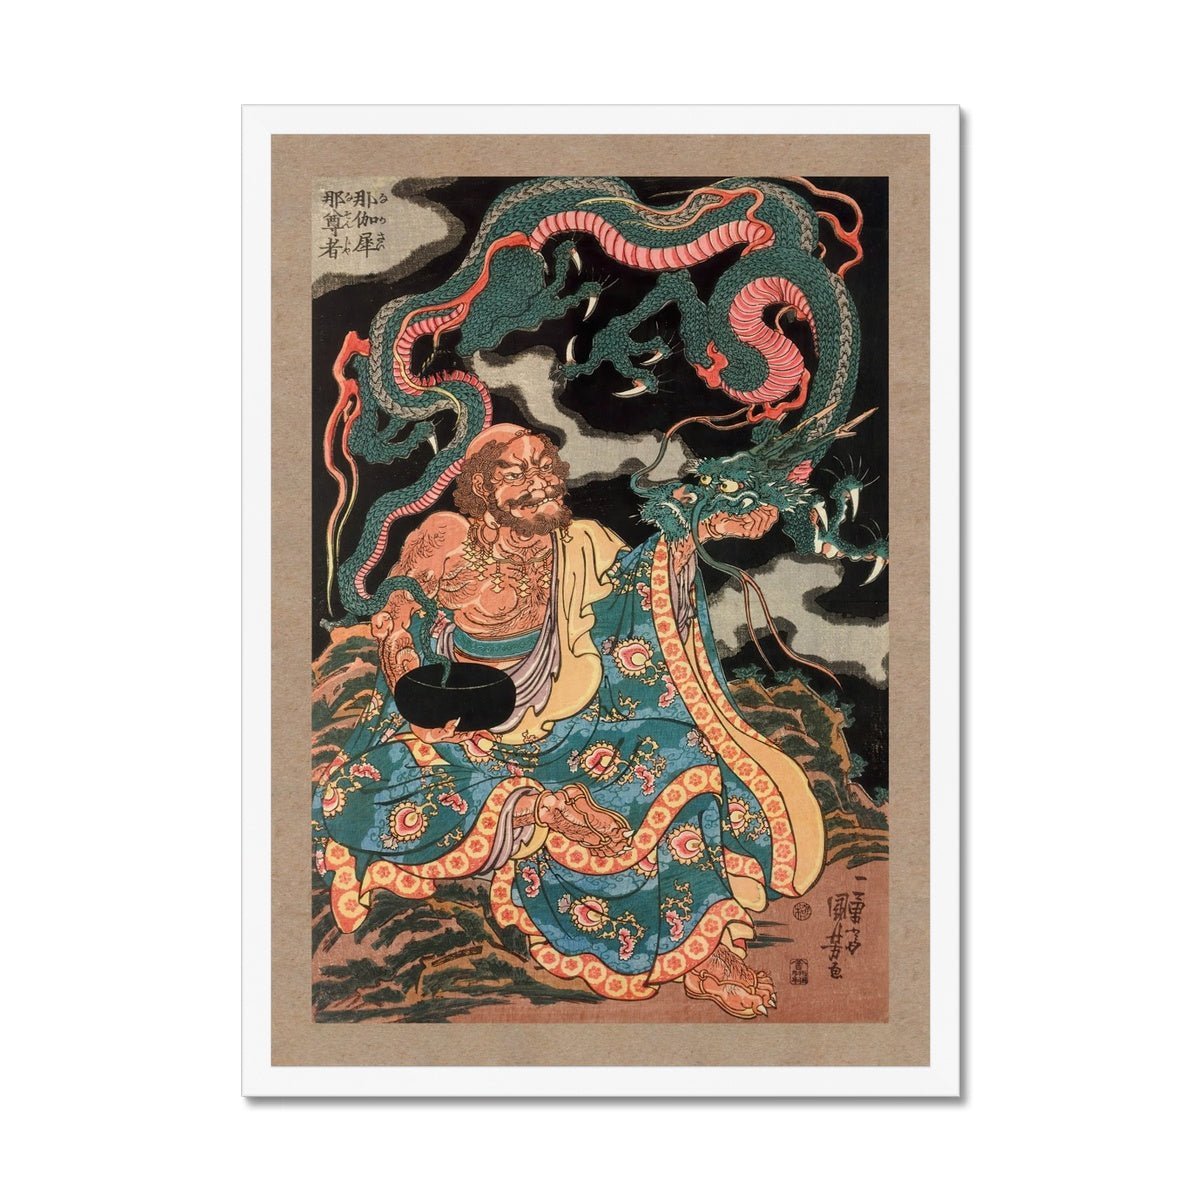 Framed Print 6"x8" / White Frame The Arhat Nakasaina Sonja Seated On a Rock, with a Dragon Emerging From His Bowl, Vintage Buddhist Japanese Framed Art Print